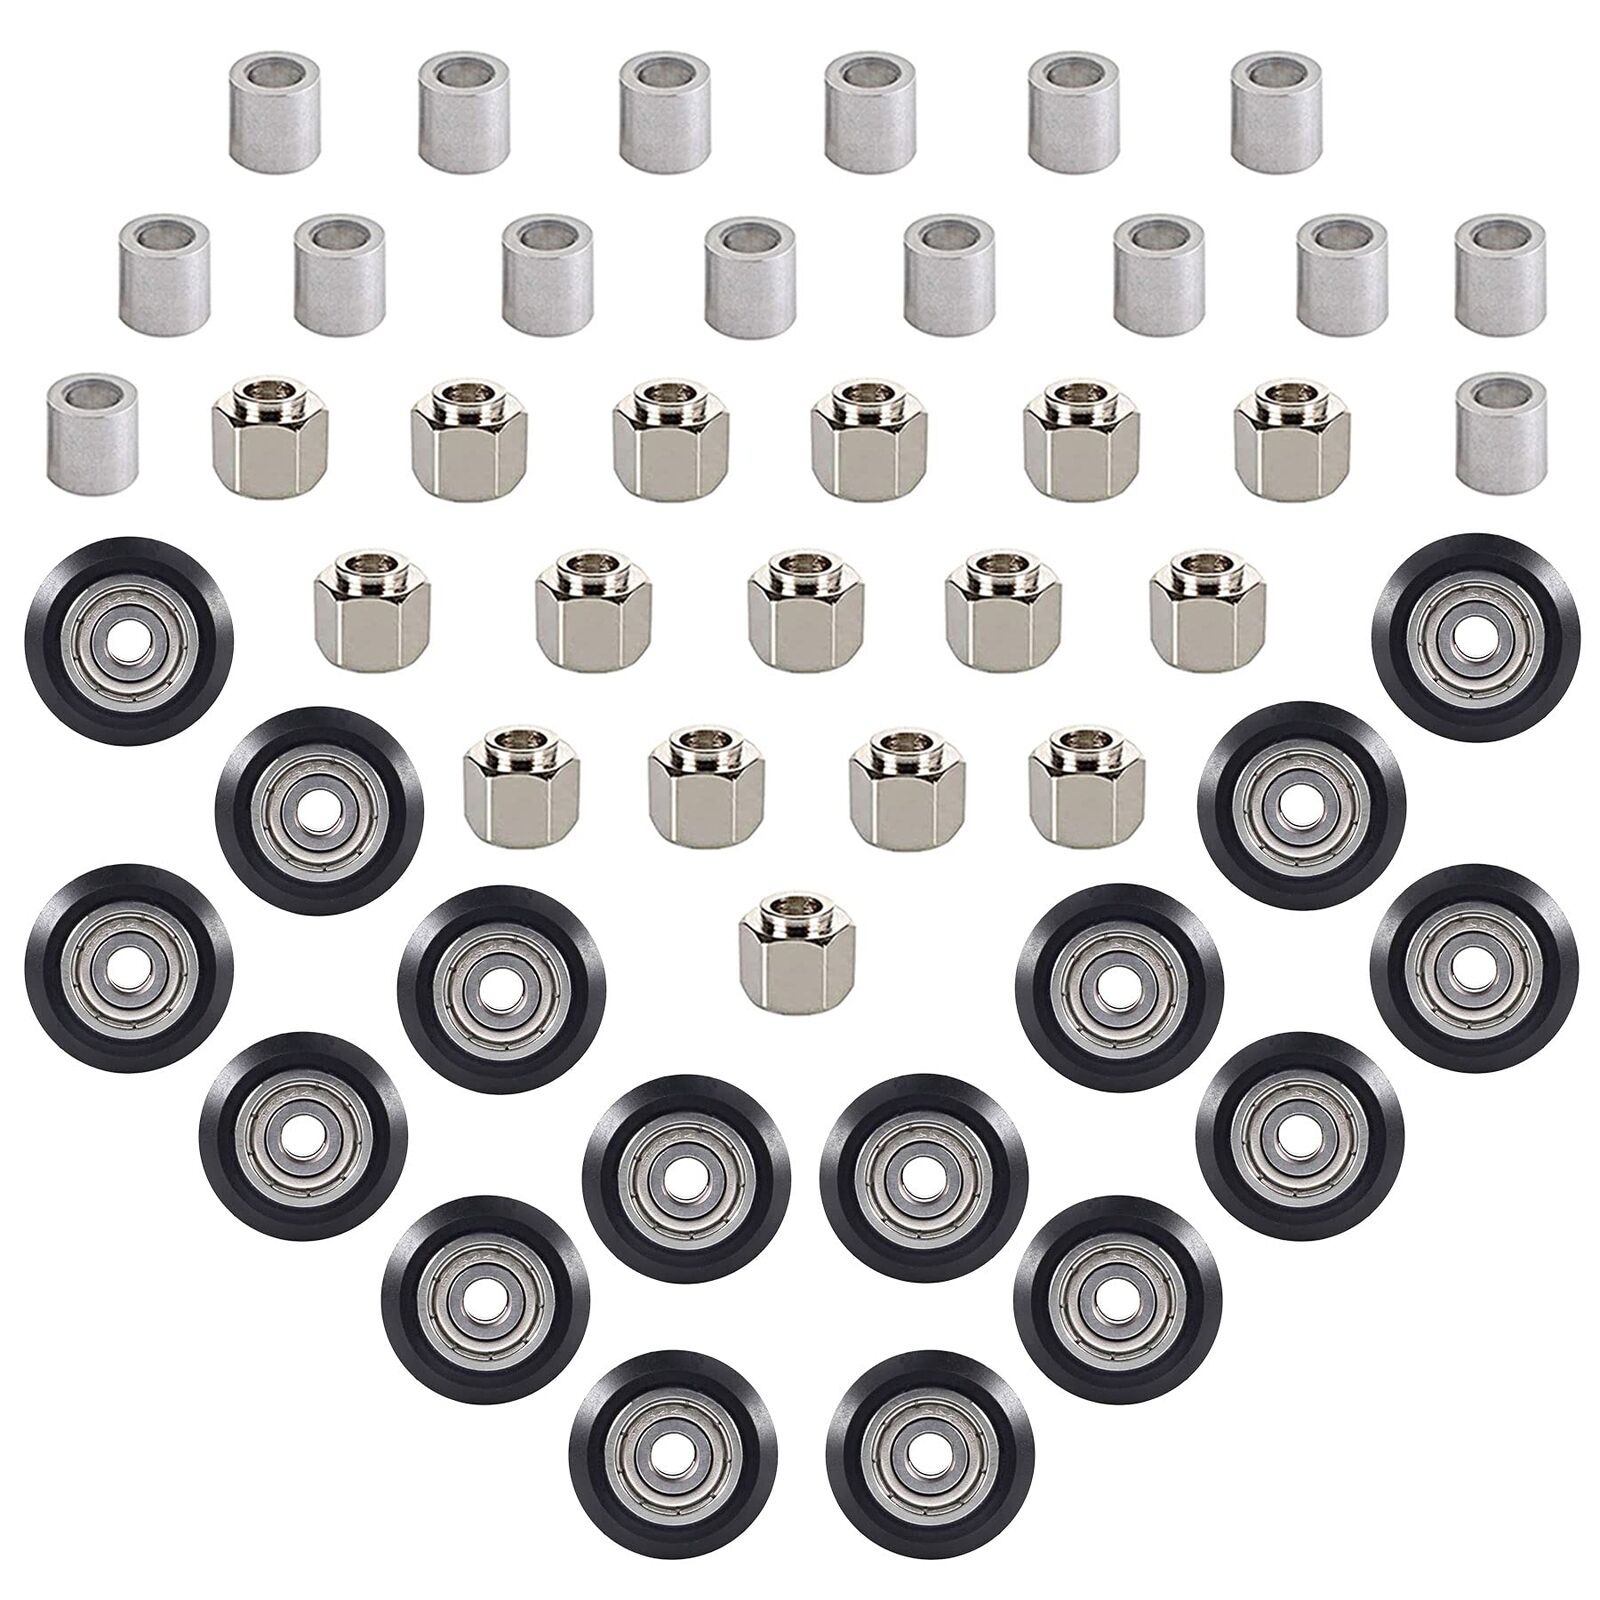 48pcs 3D Printer POM Wheels Roller Pulley Bearing w/ Eccentric Spacer Accessorie